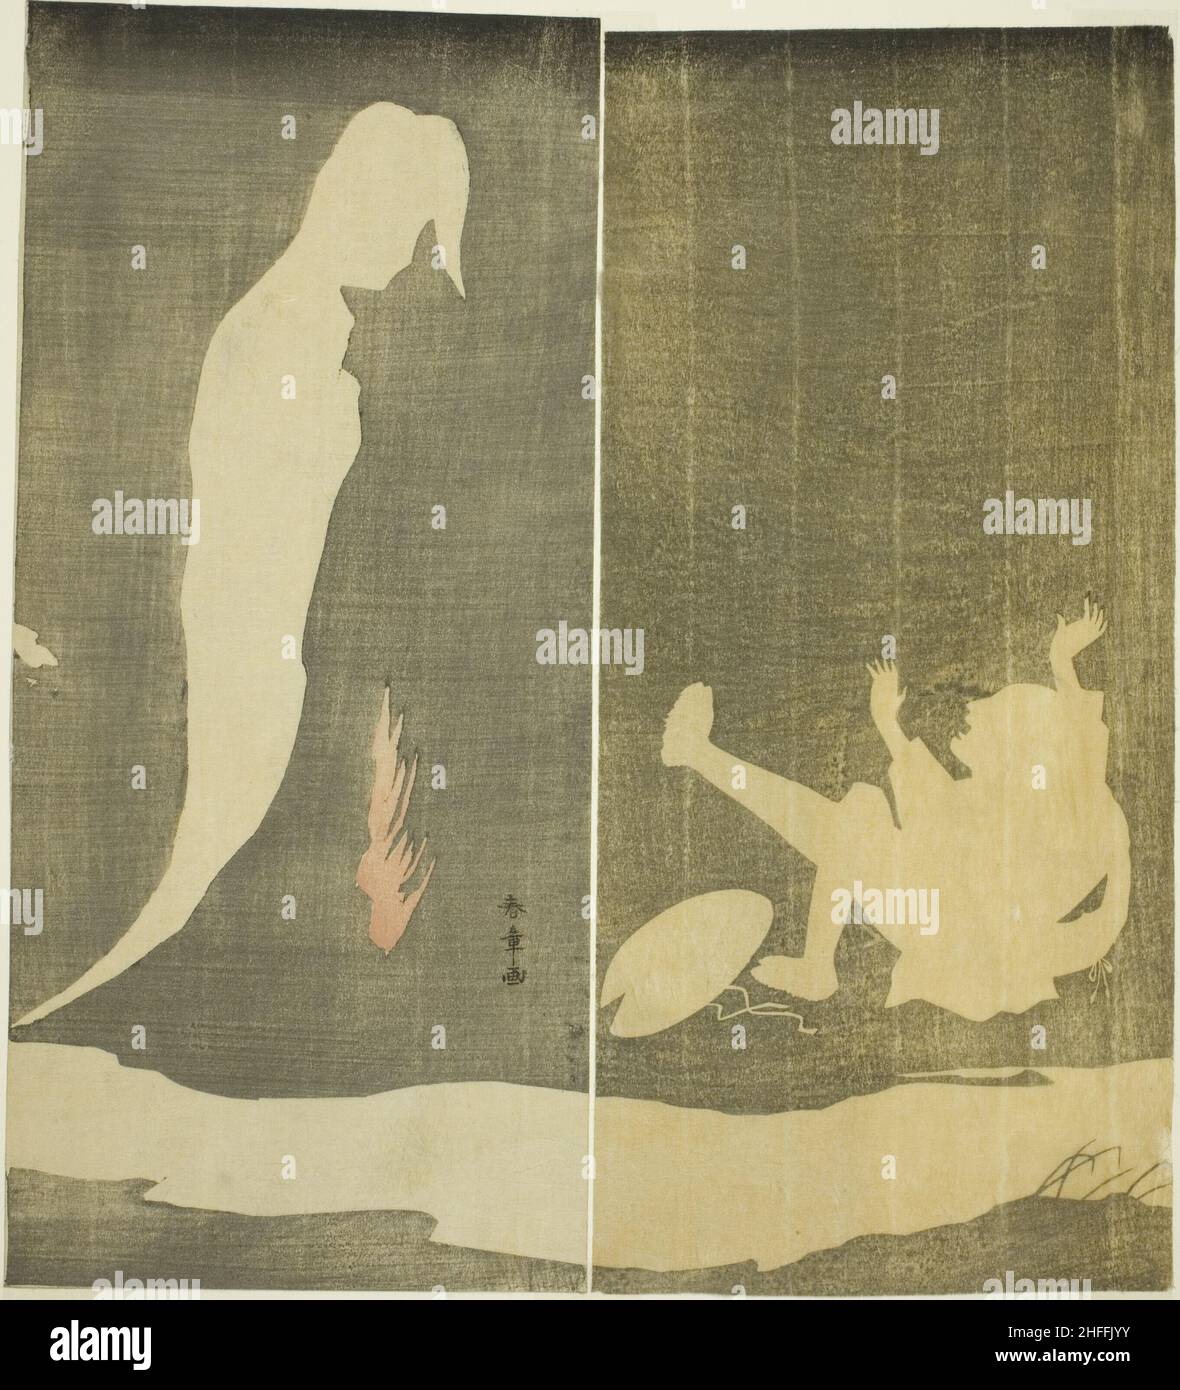 Man Falling Backward, Startled by a Woman's Ghost over a River, Japan, c. 1782. Stock Photo